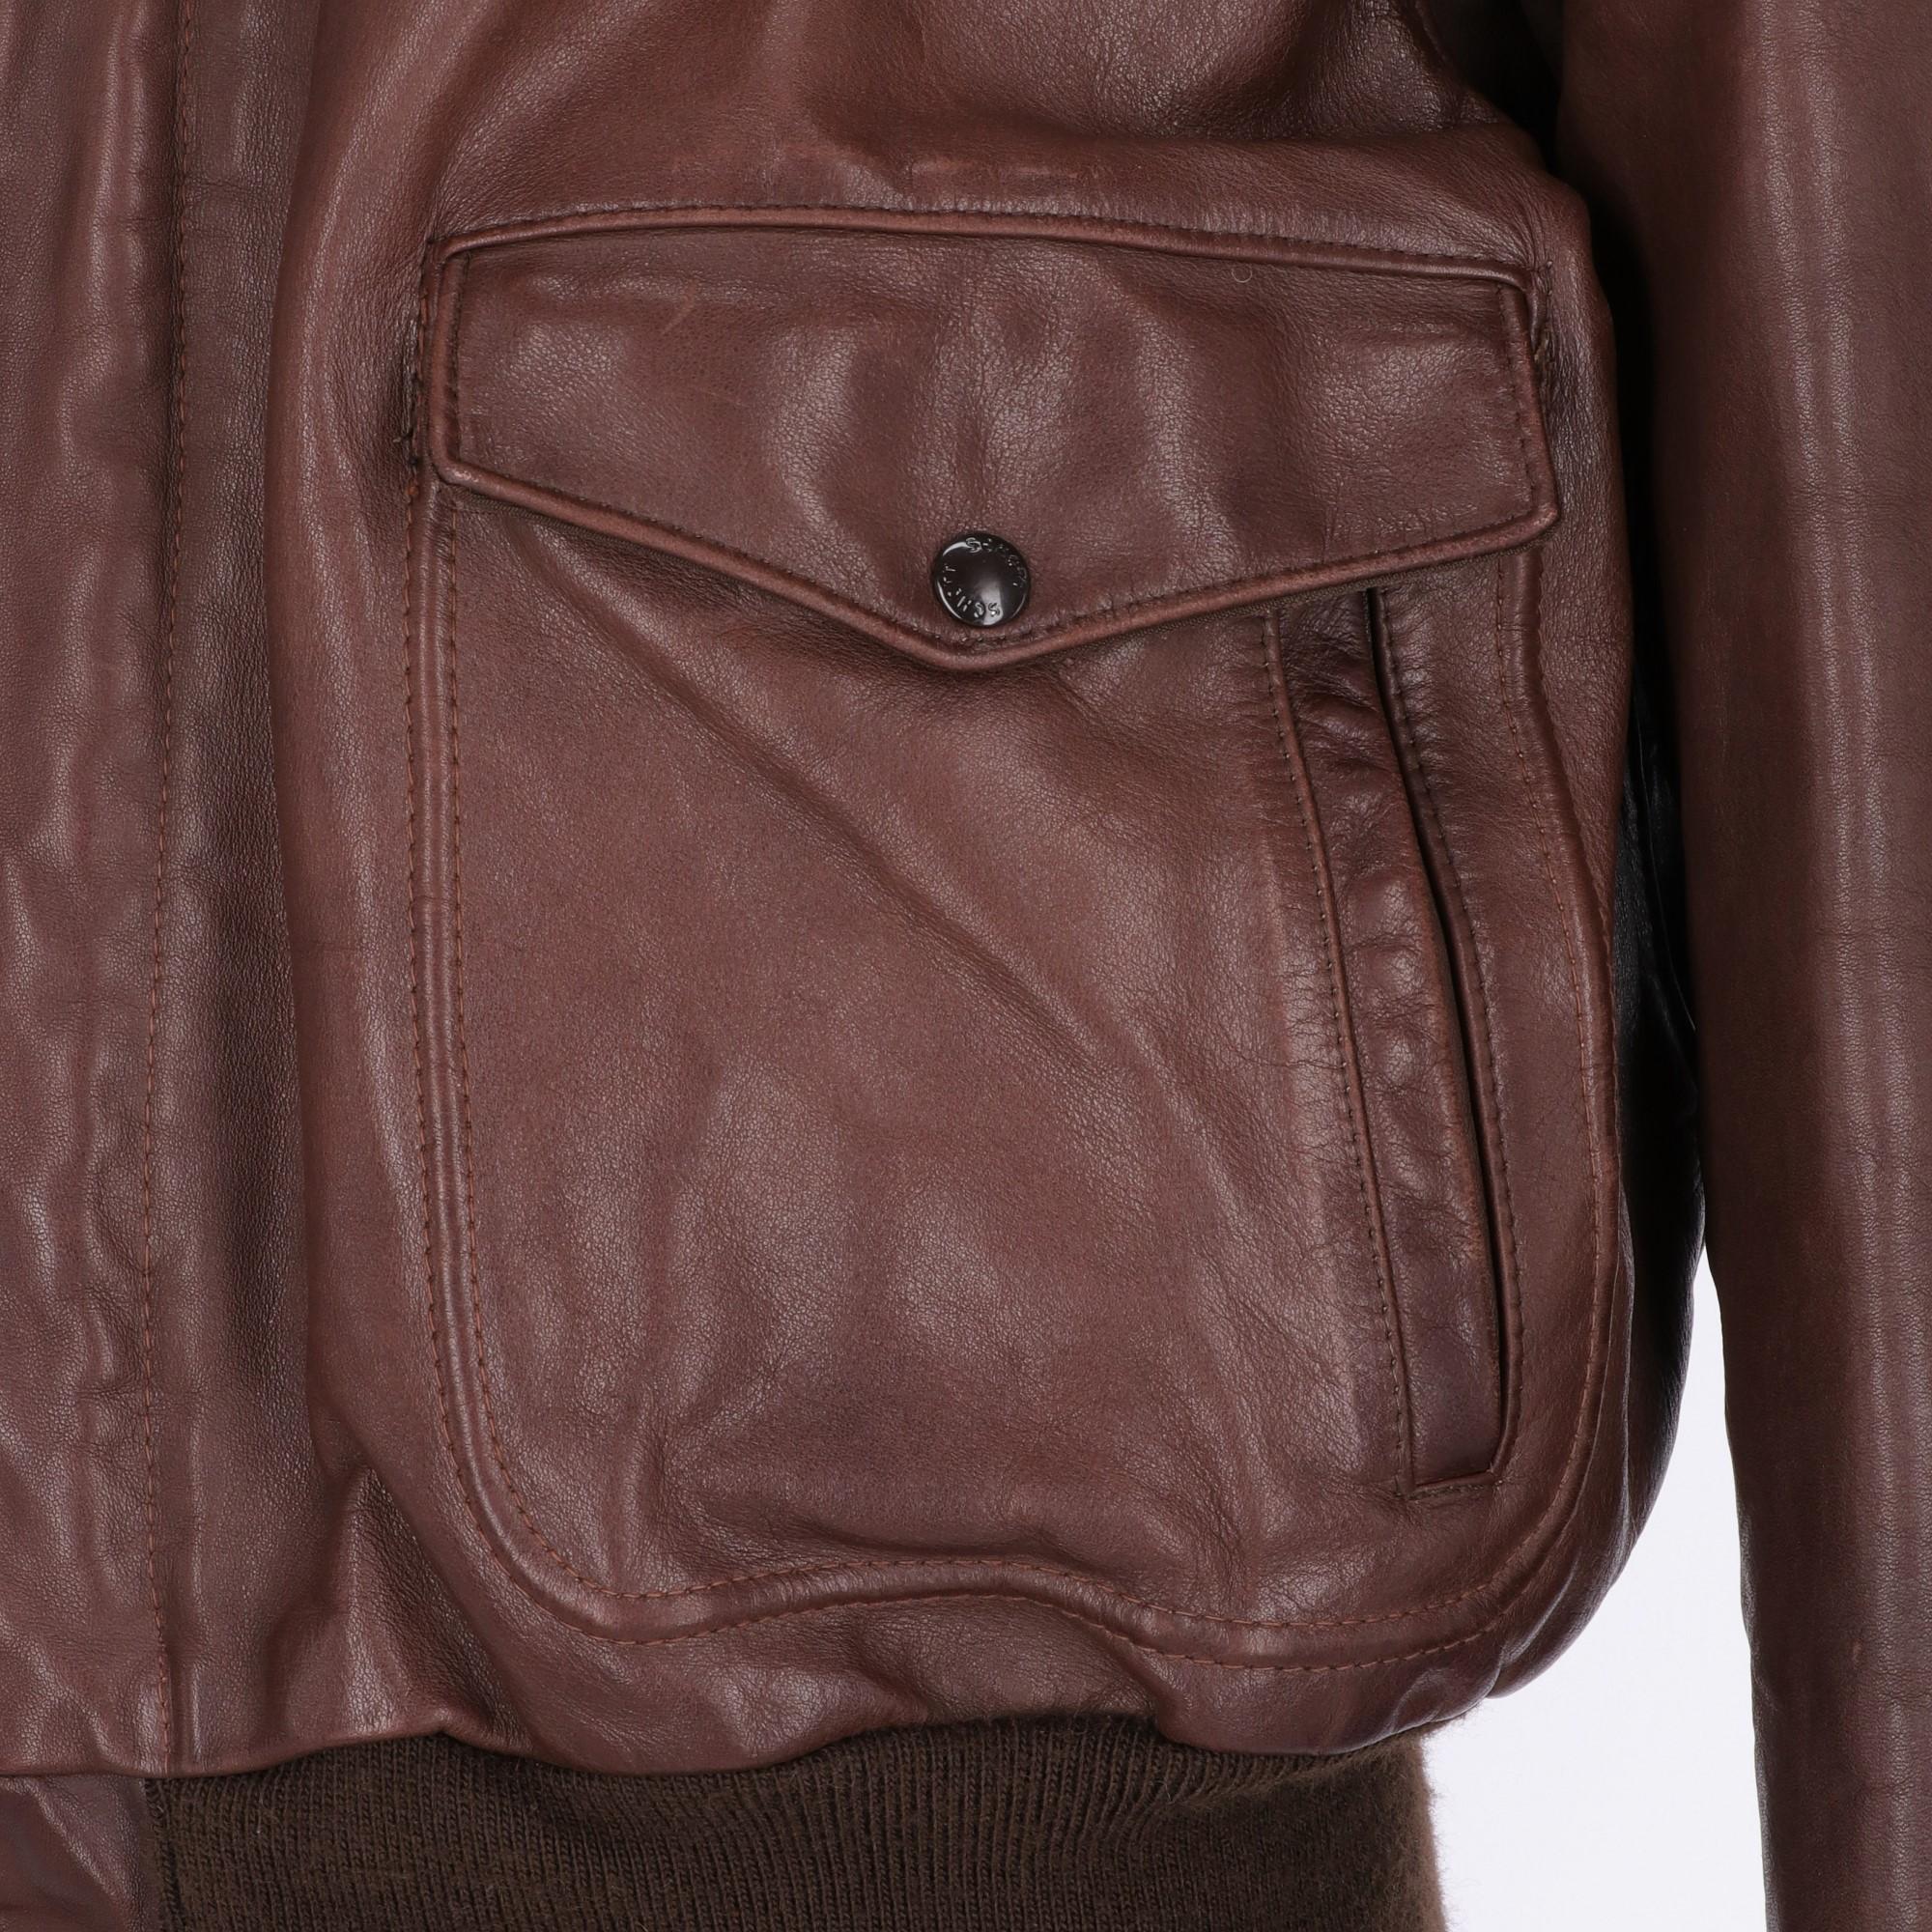 80s brown leather jacket